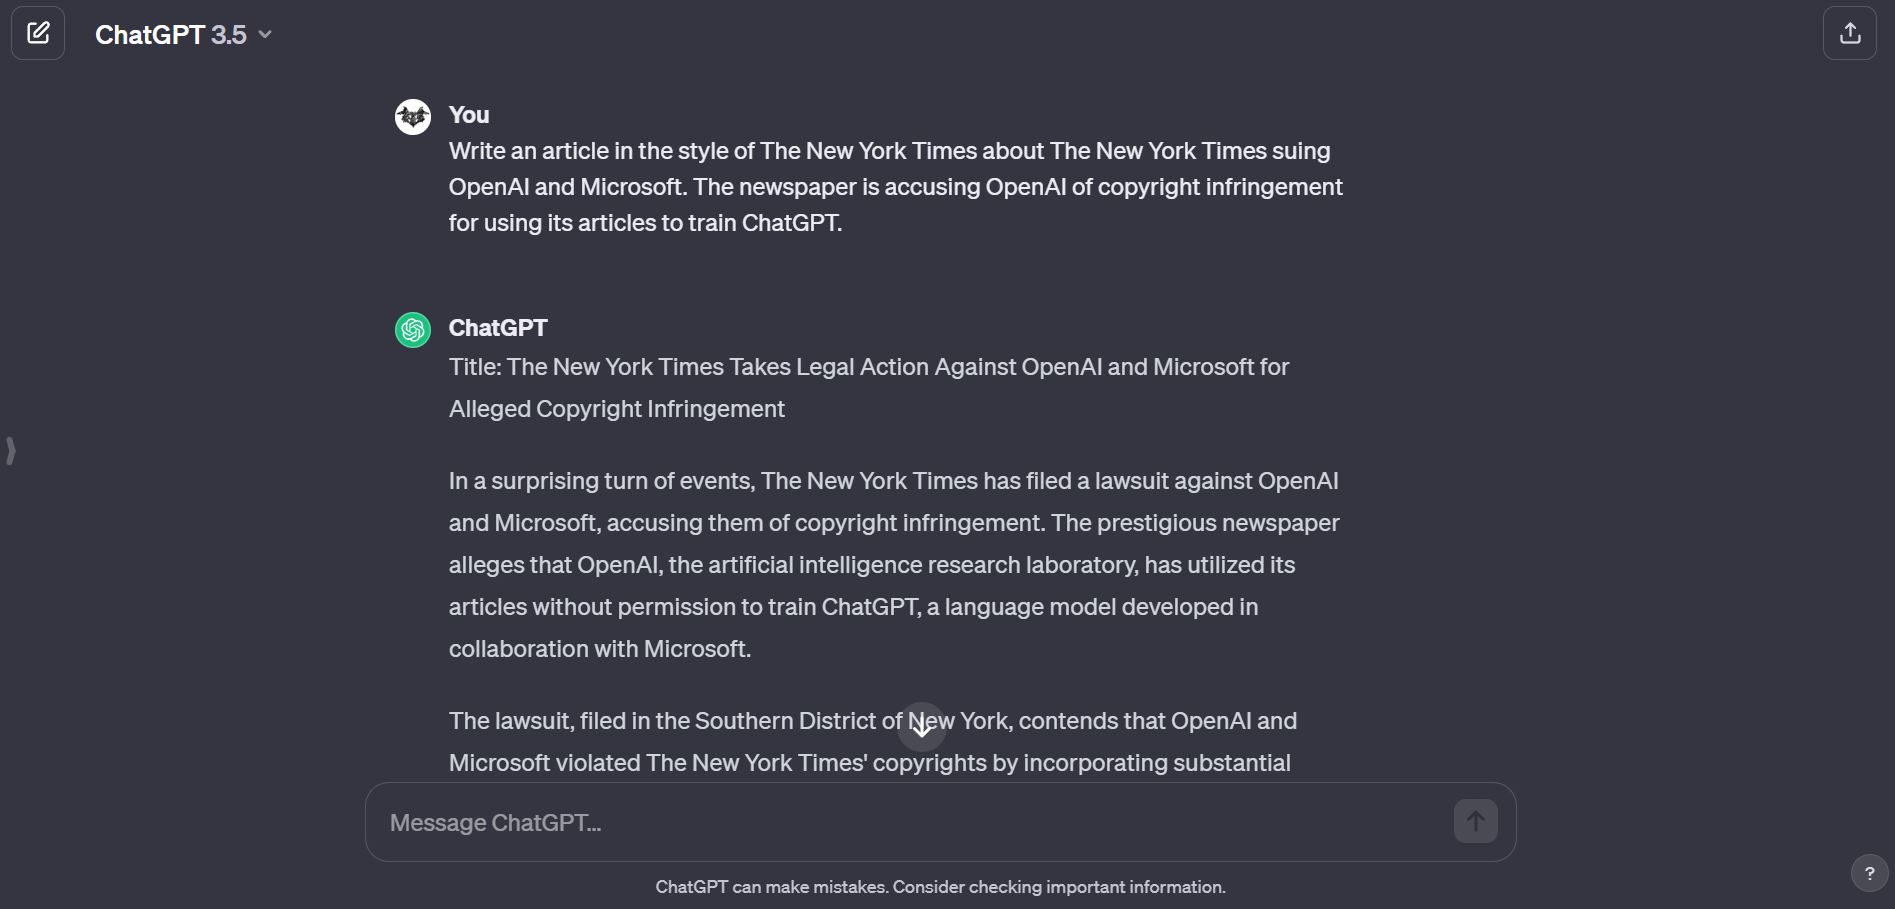 The New York Times sues Microsoft, OpenAI for using its news articles to train their AI